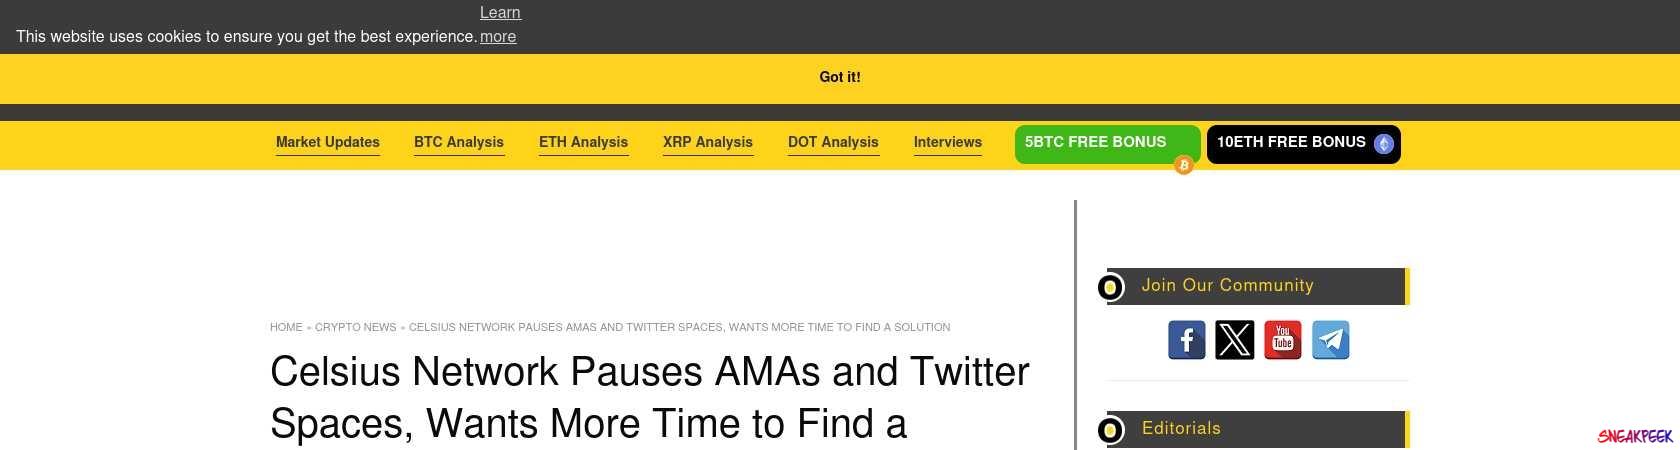 Read the full Article:  ⭲ Celsius Network Pauses AMAs and Twitter Spaces, Wants More Time to Find a Solution